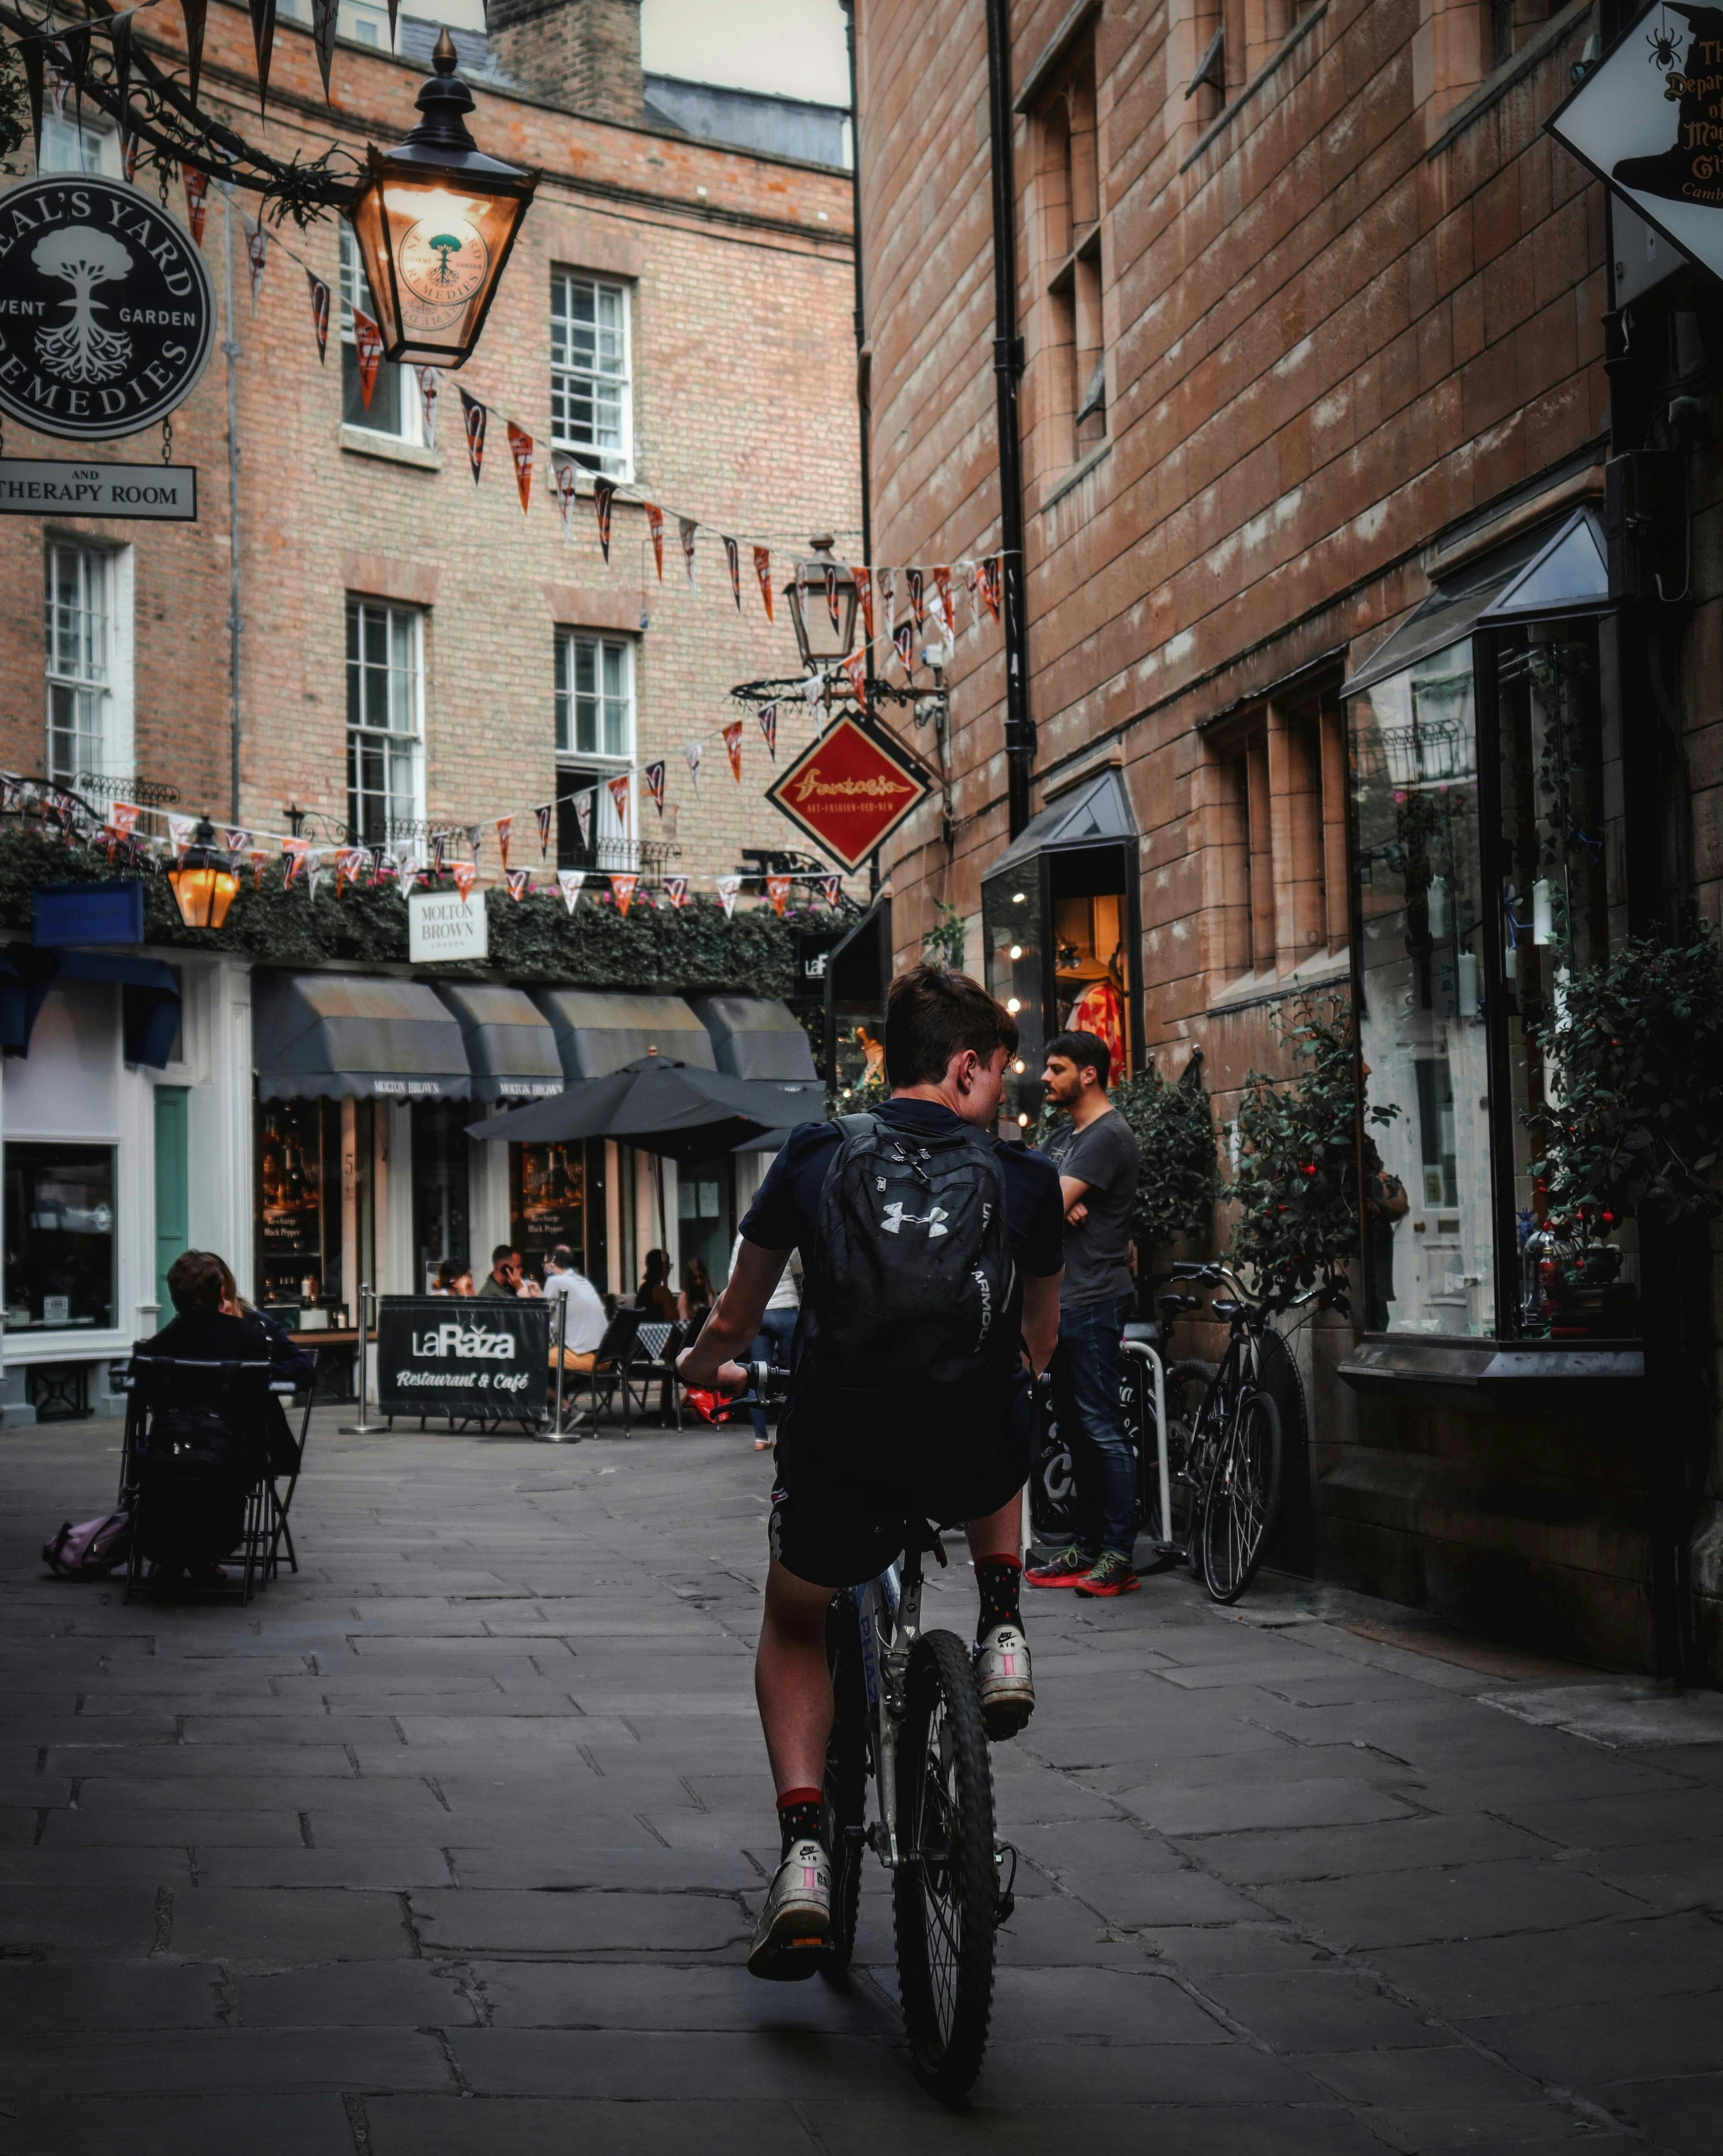 A Side View of a Man Riding a Bicycle on the Street · Free Stock Photo